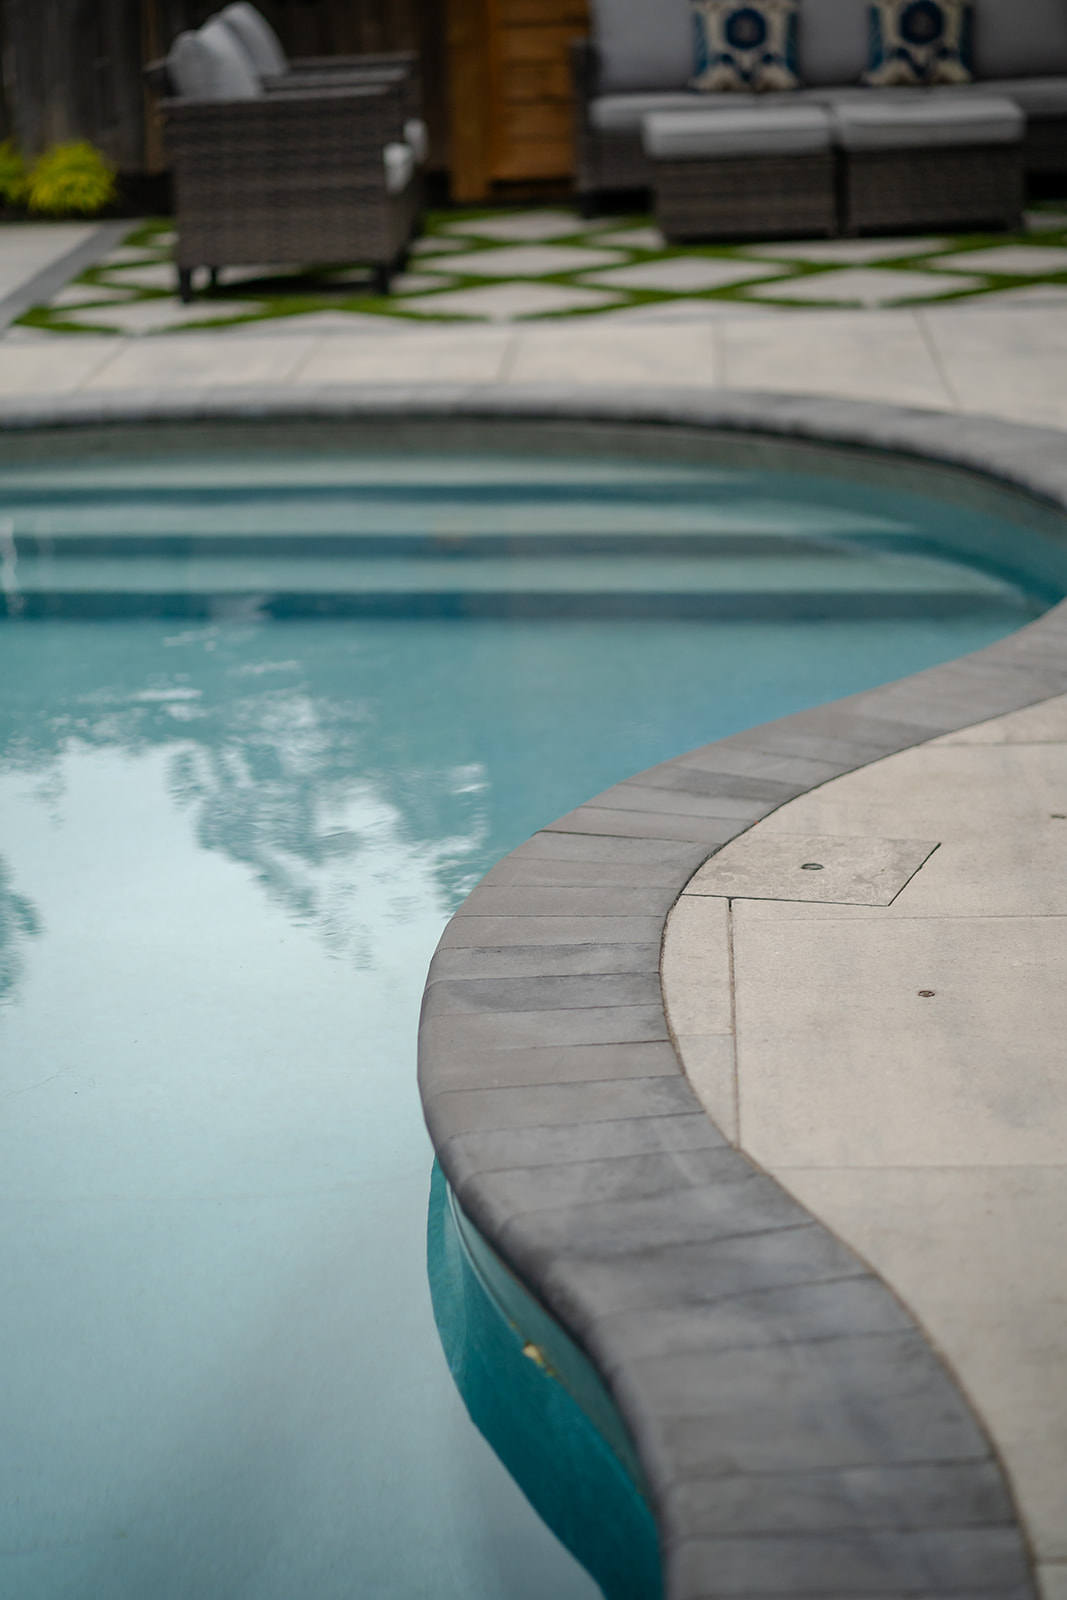 Interlocking patio stones lining the inground pool while stairs on the opposite end are leading into the pool.